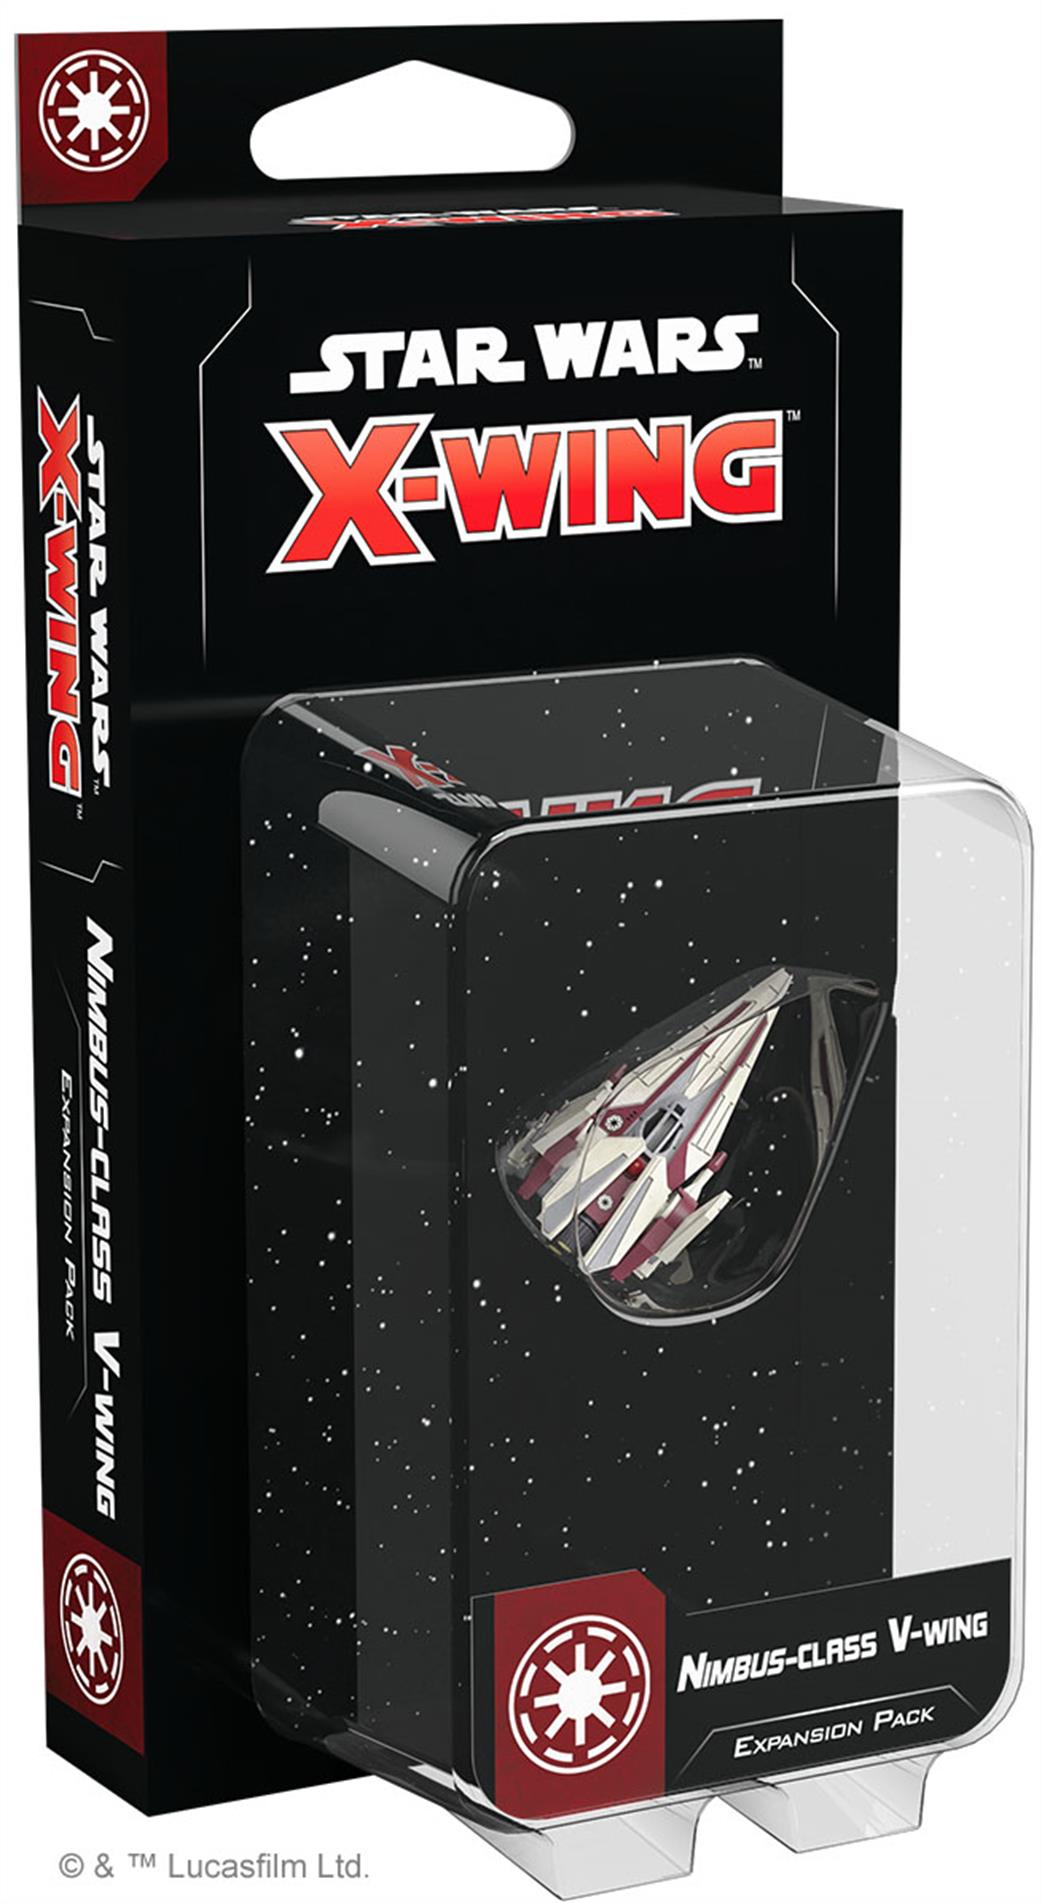 Fantasy Flight Games  SWZ80 Nimbus-class V-Wing Expansion Pack from Star Wars X-Wing 2nd Ed